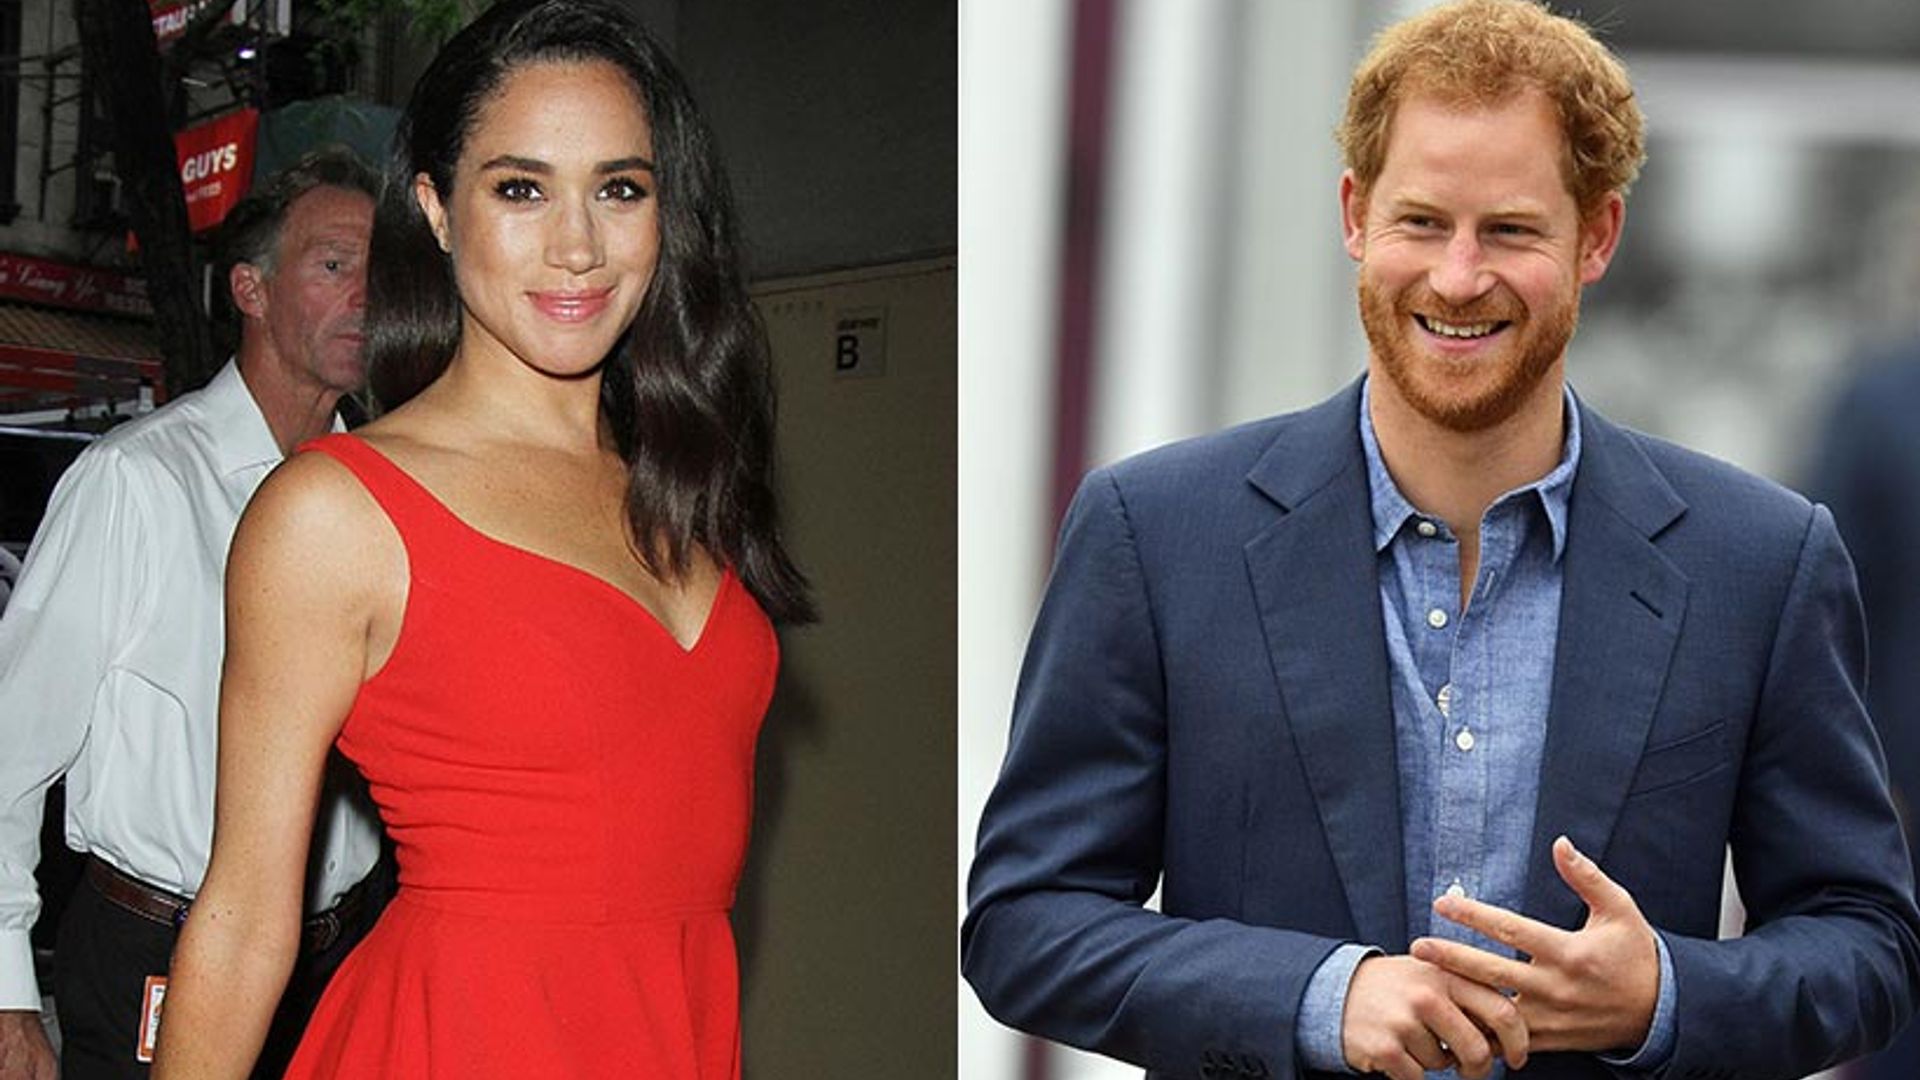 Prince Harry’s girlfriend Meghan Markle ends Reitmans clothing deal: full story here